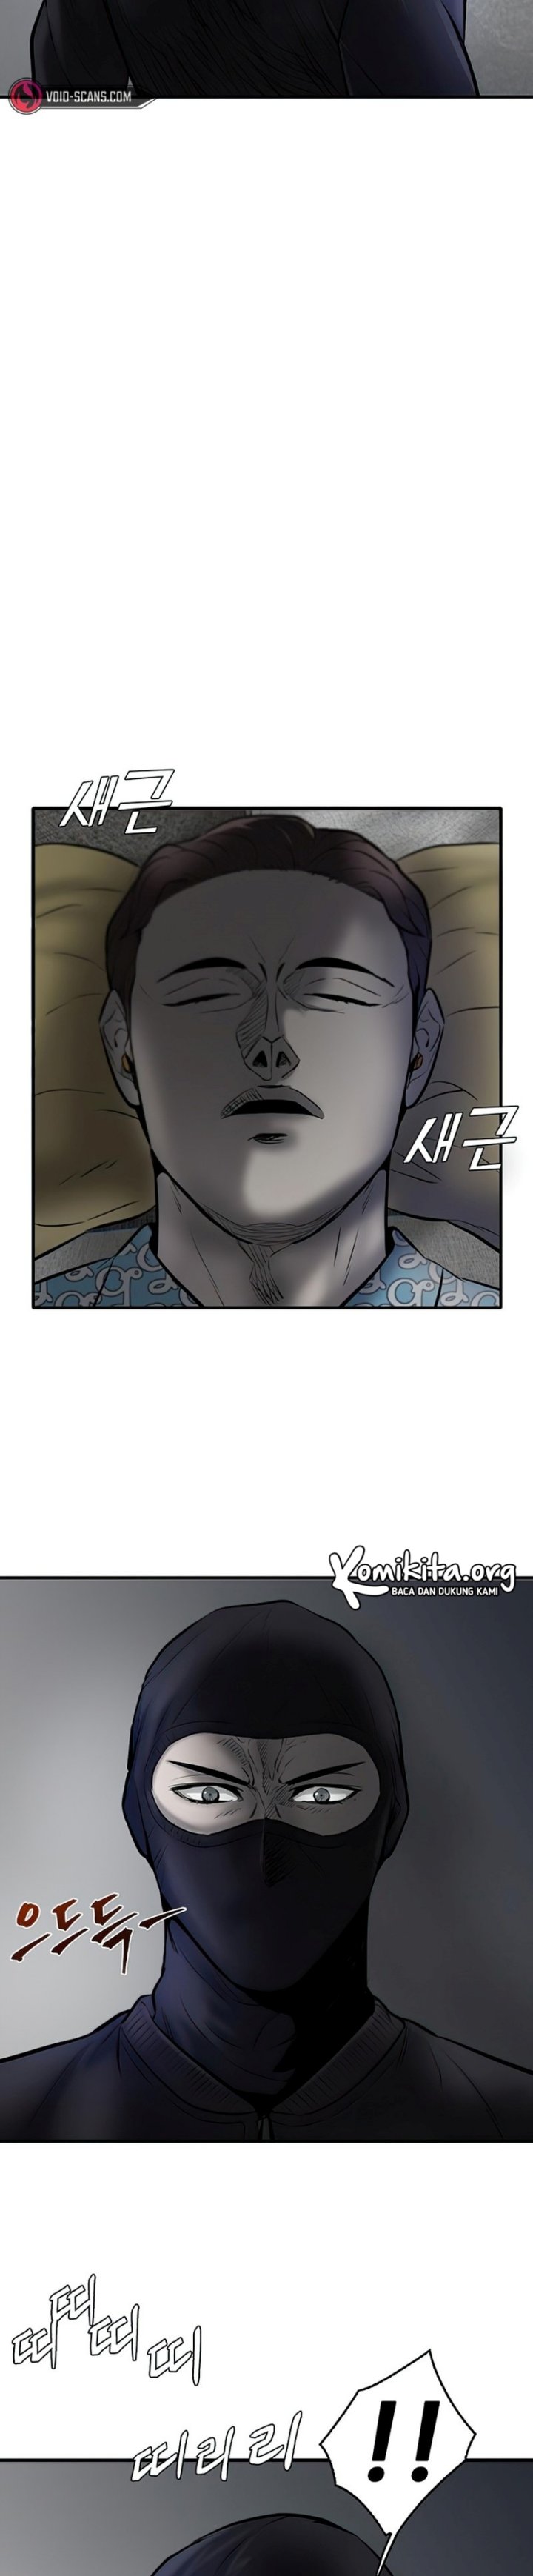 Limitless Chapter 06 27